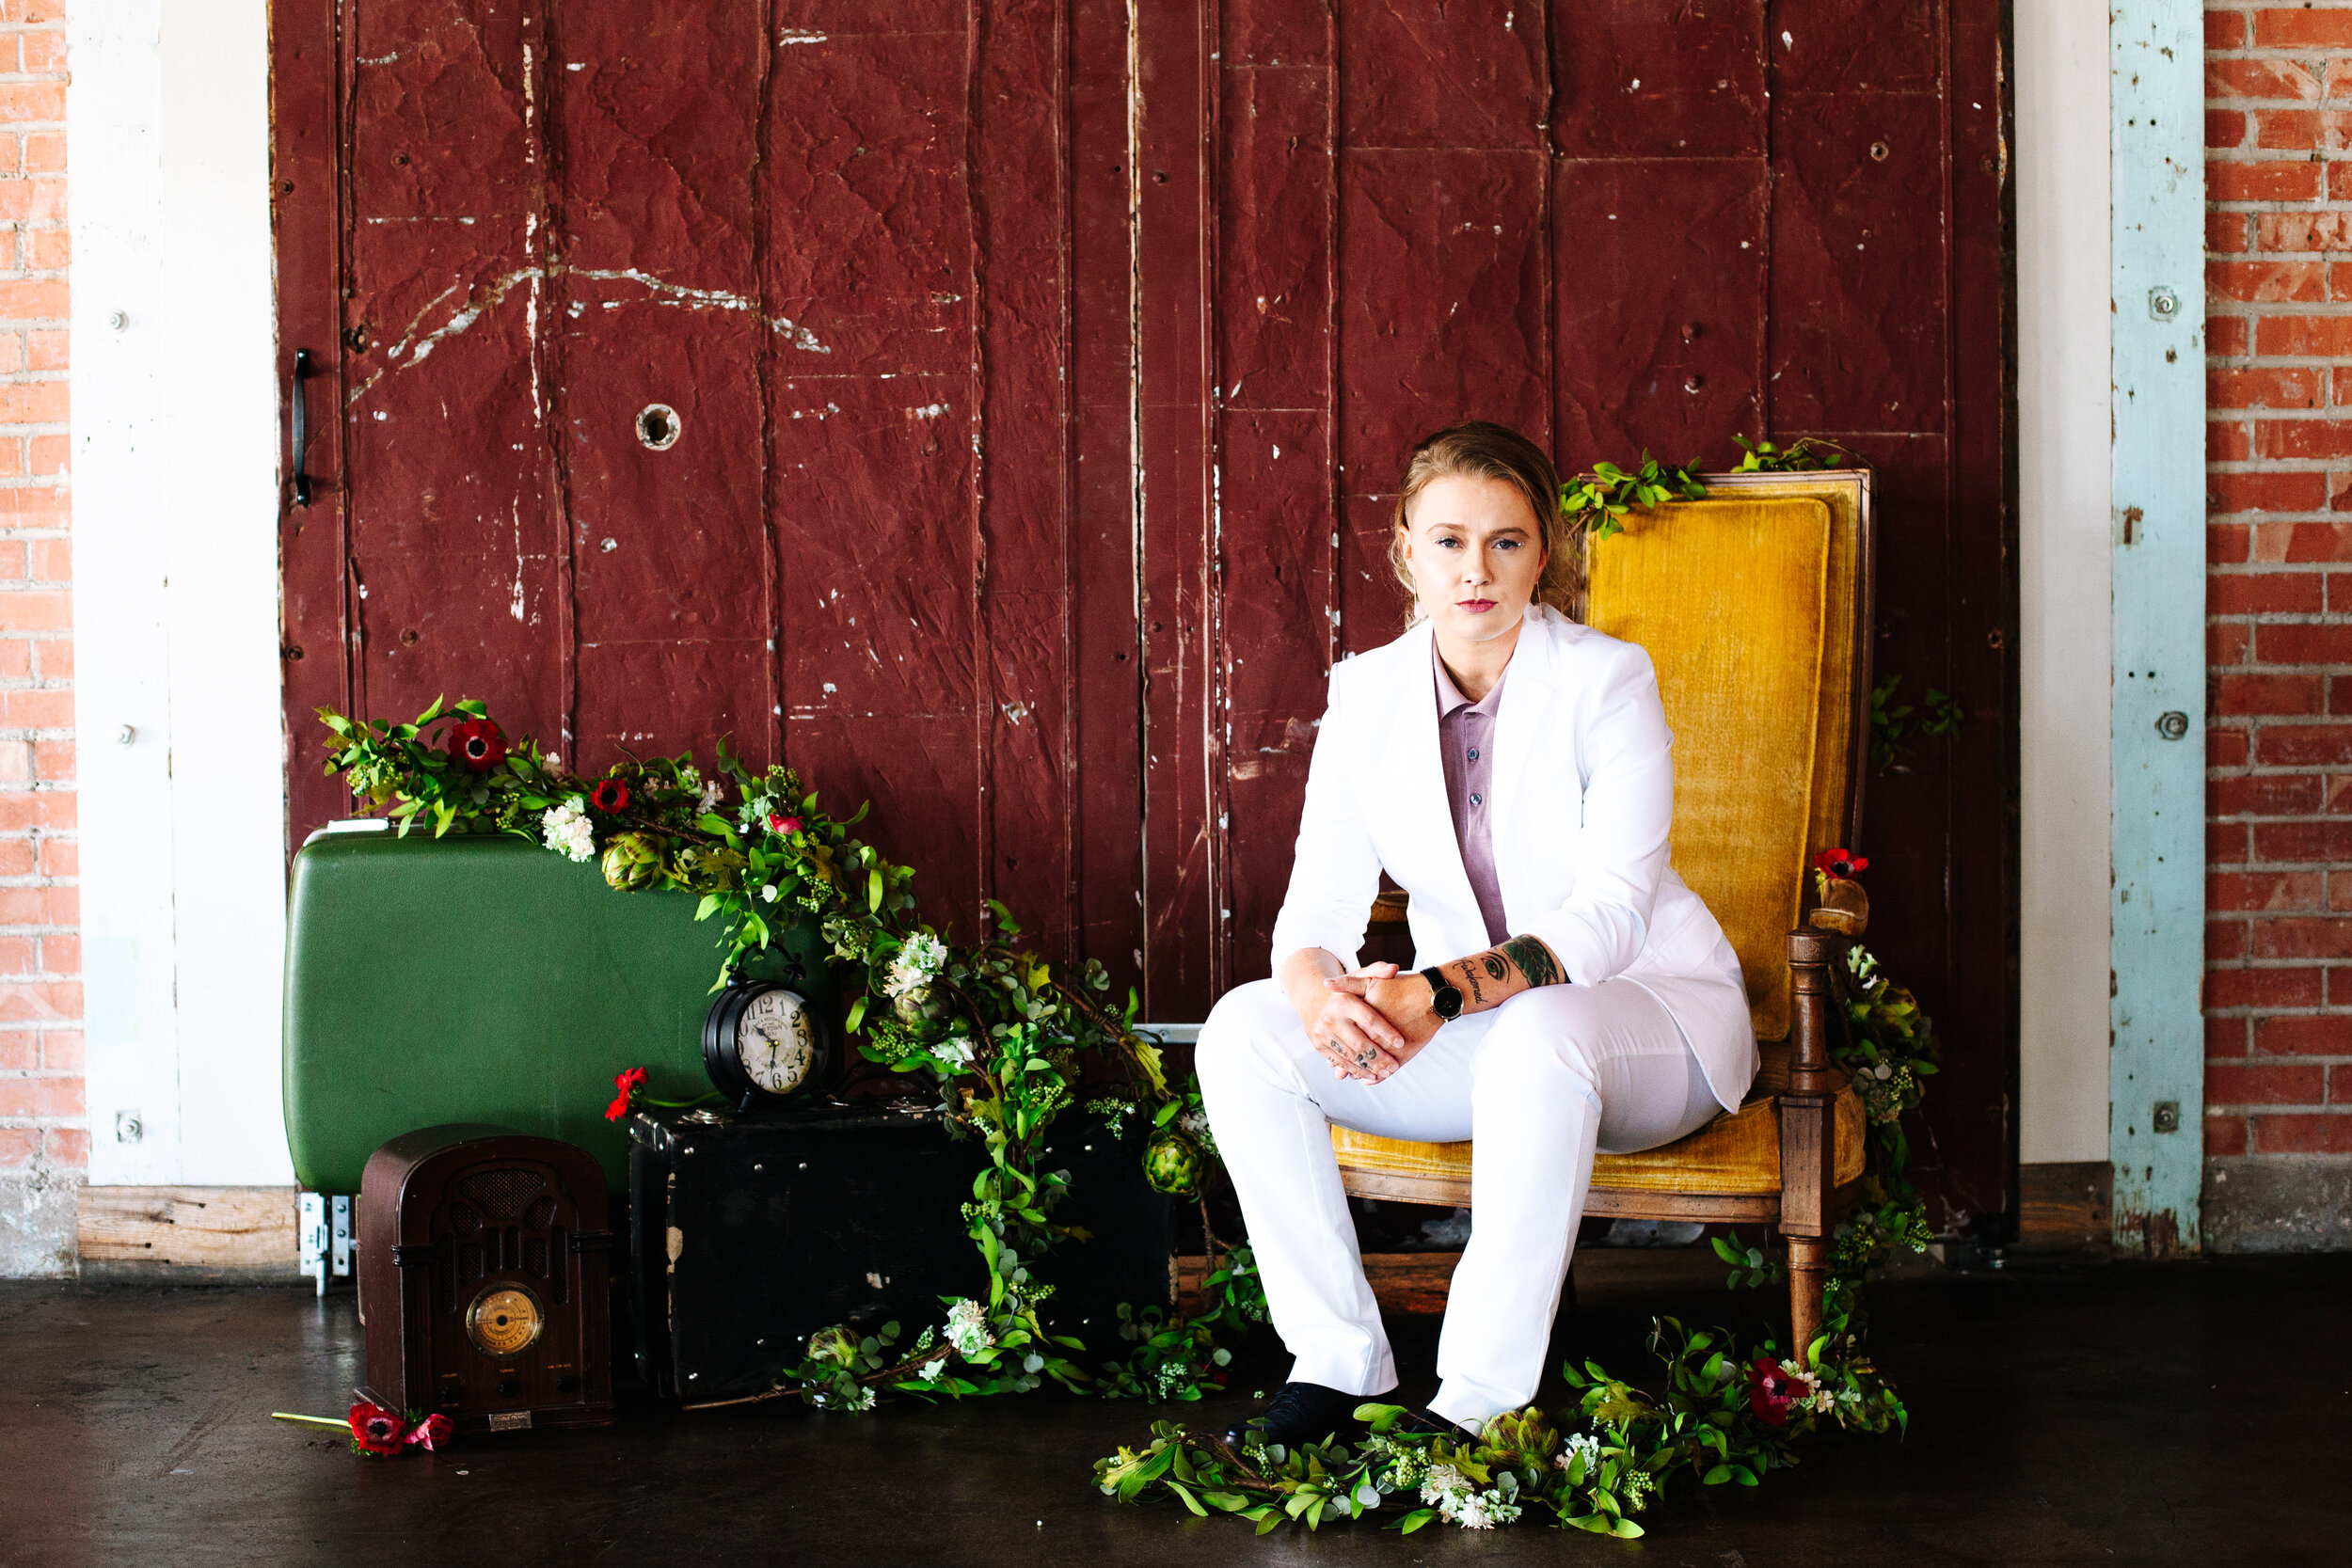  Bride in white suit sits in a vintage gold-yellow chair surrounded by greenery at her lesbian wedding.